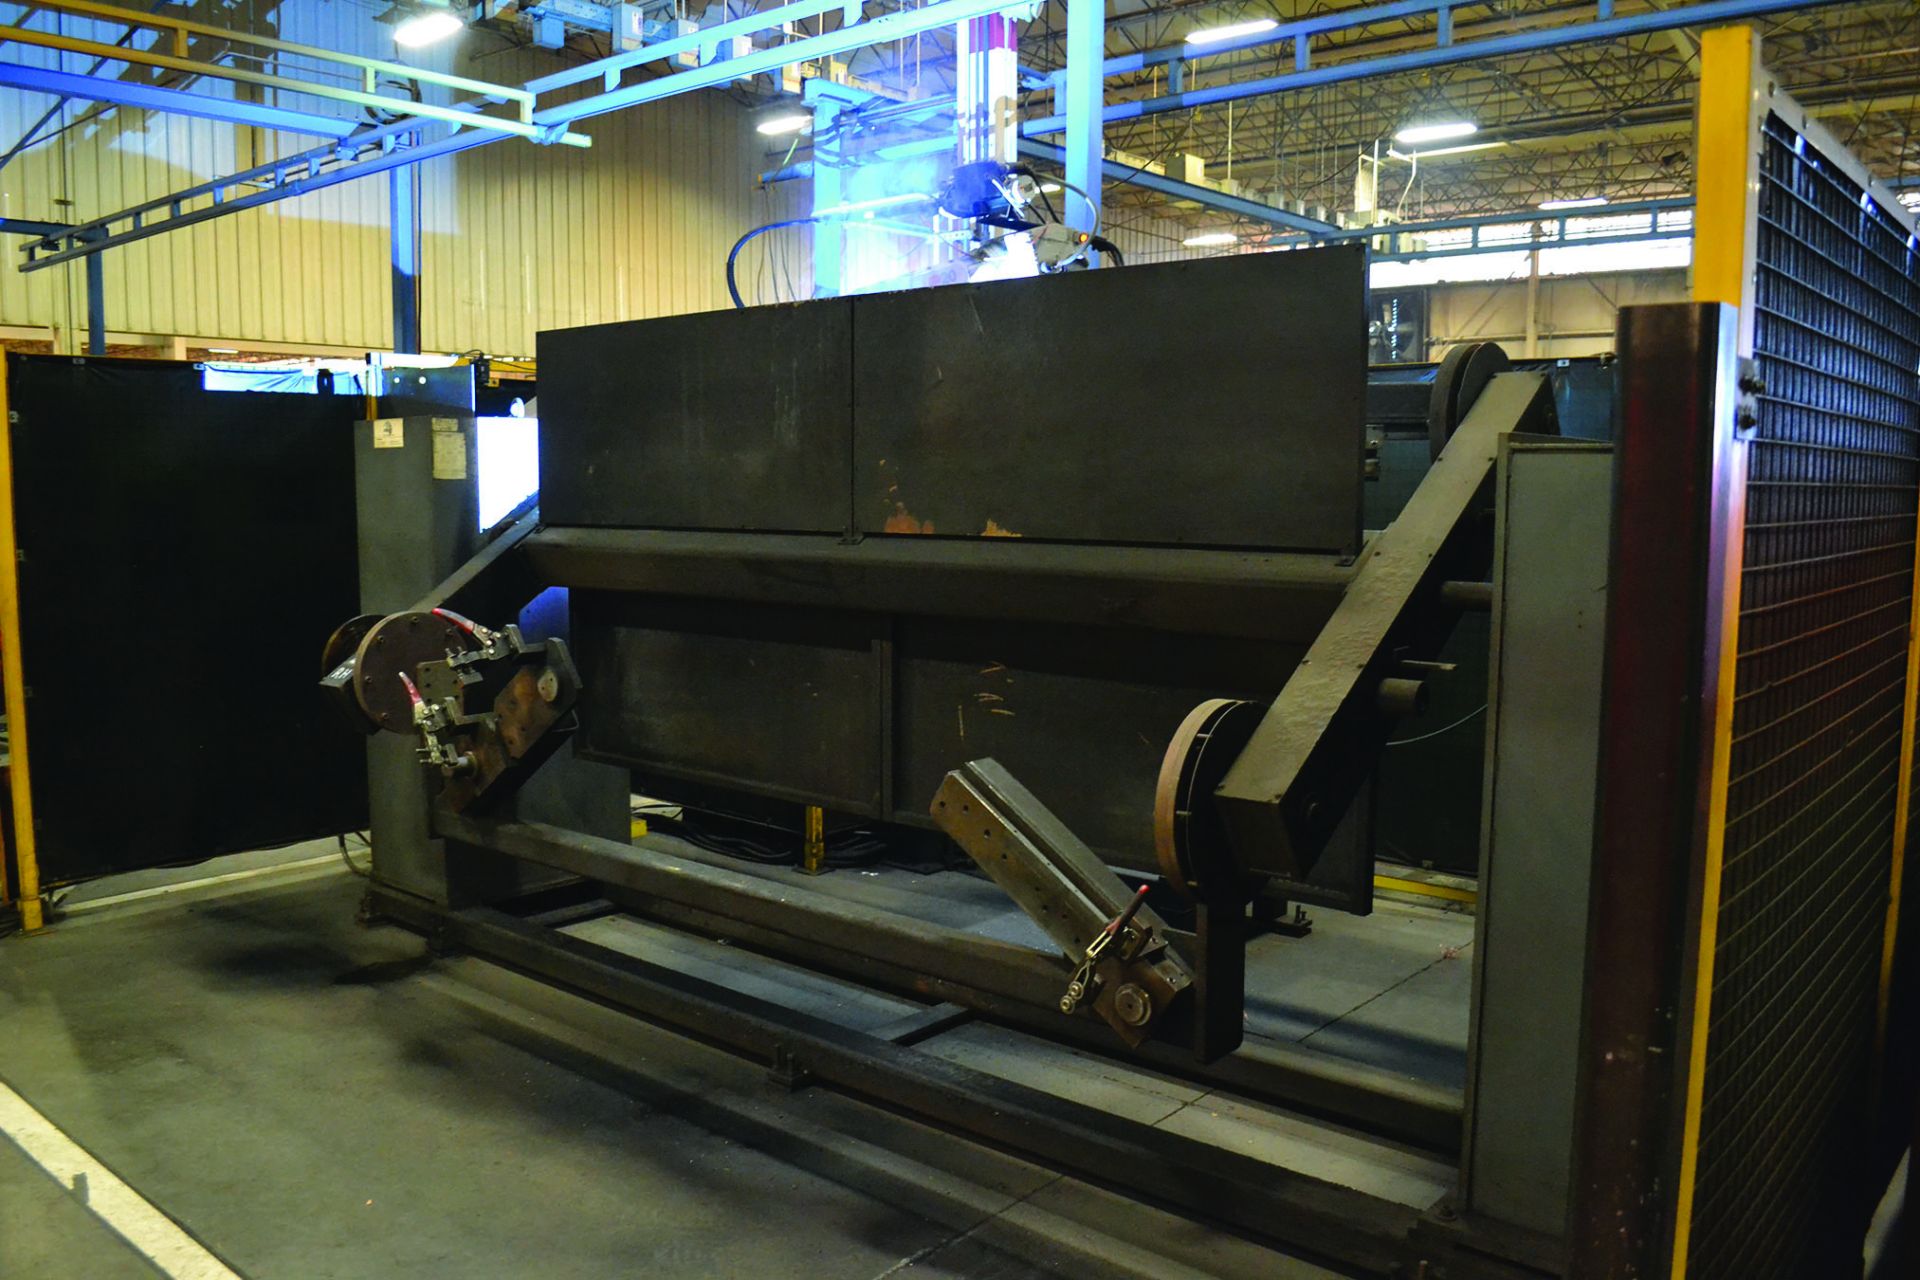 2001 MOTOMAN WITH 120 ROTARY TRUNNION & 2001 MOTOMAN UP20 ROBOT MILLER AXCESS, 450 WELDING POWER - Image 6 of 9